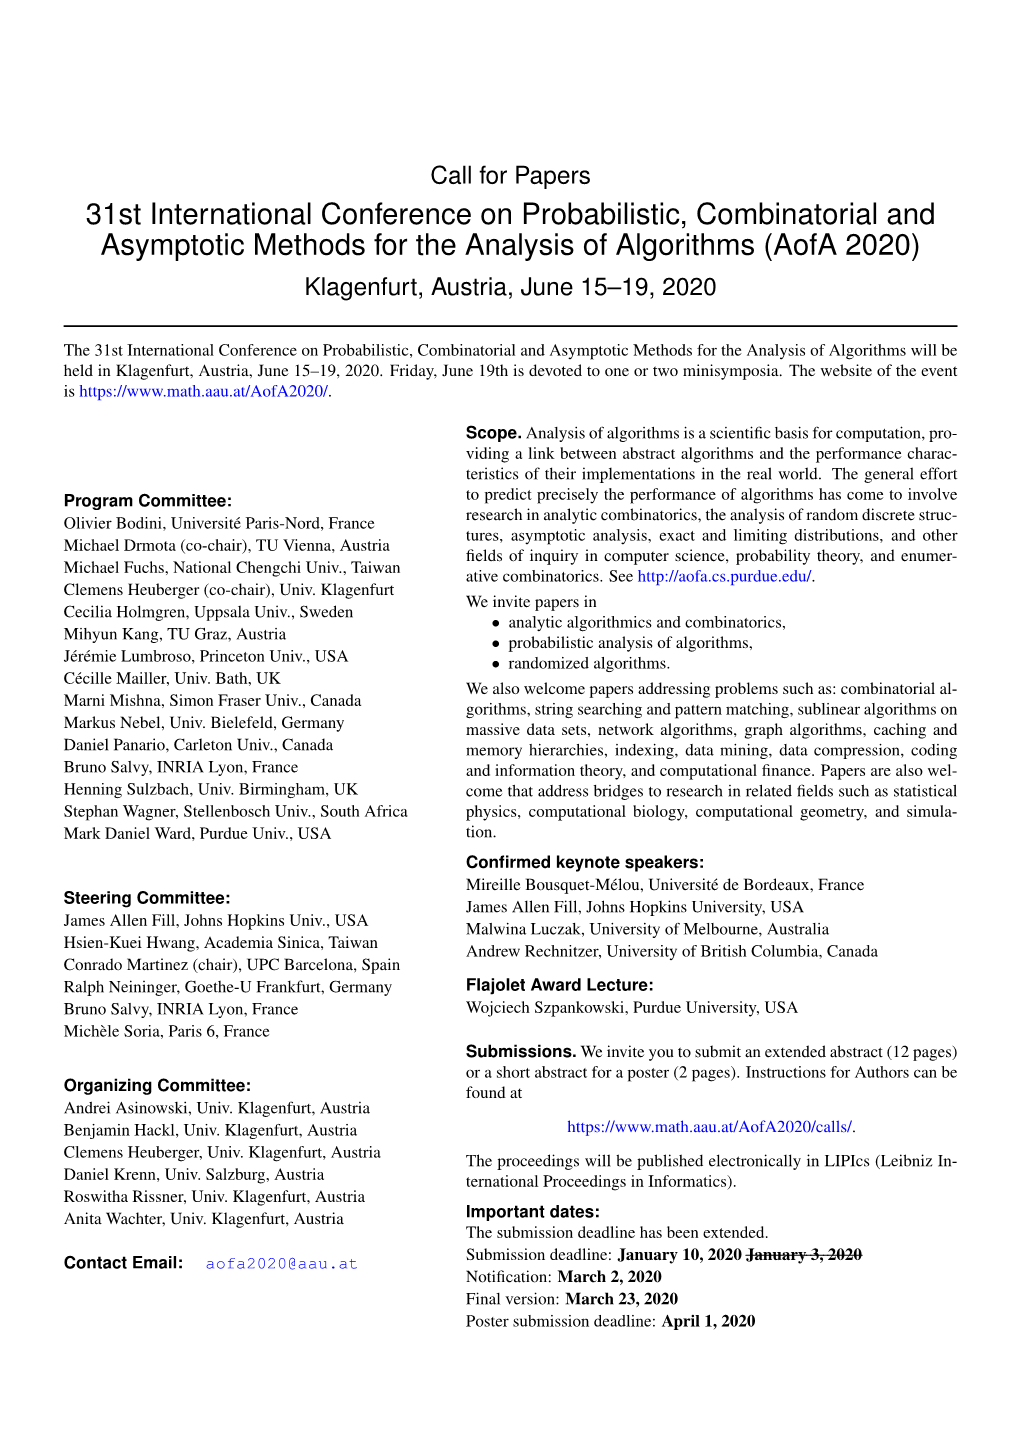 Call for Papers – Aofa2020